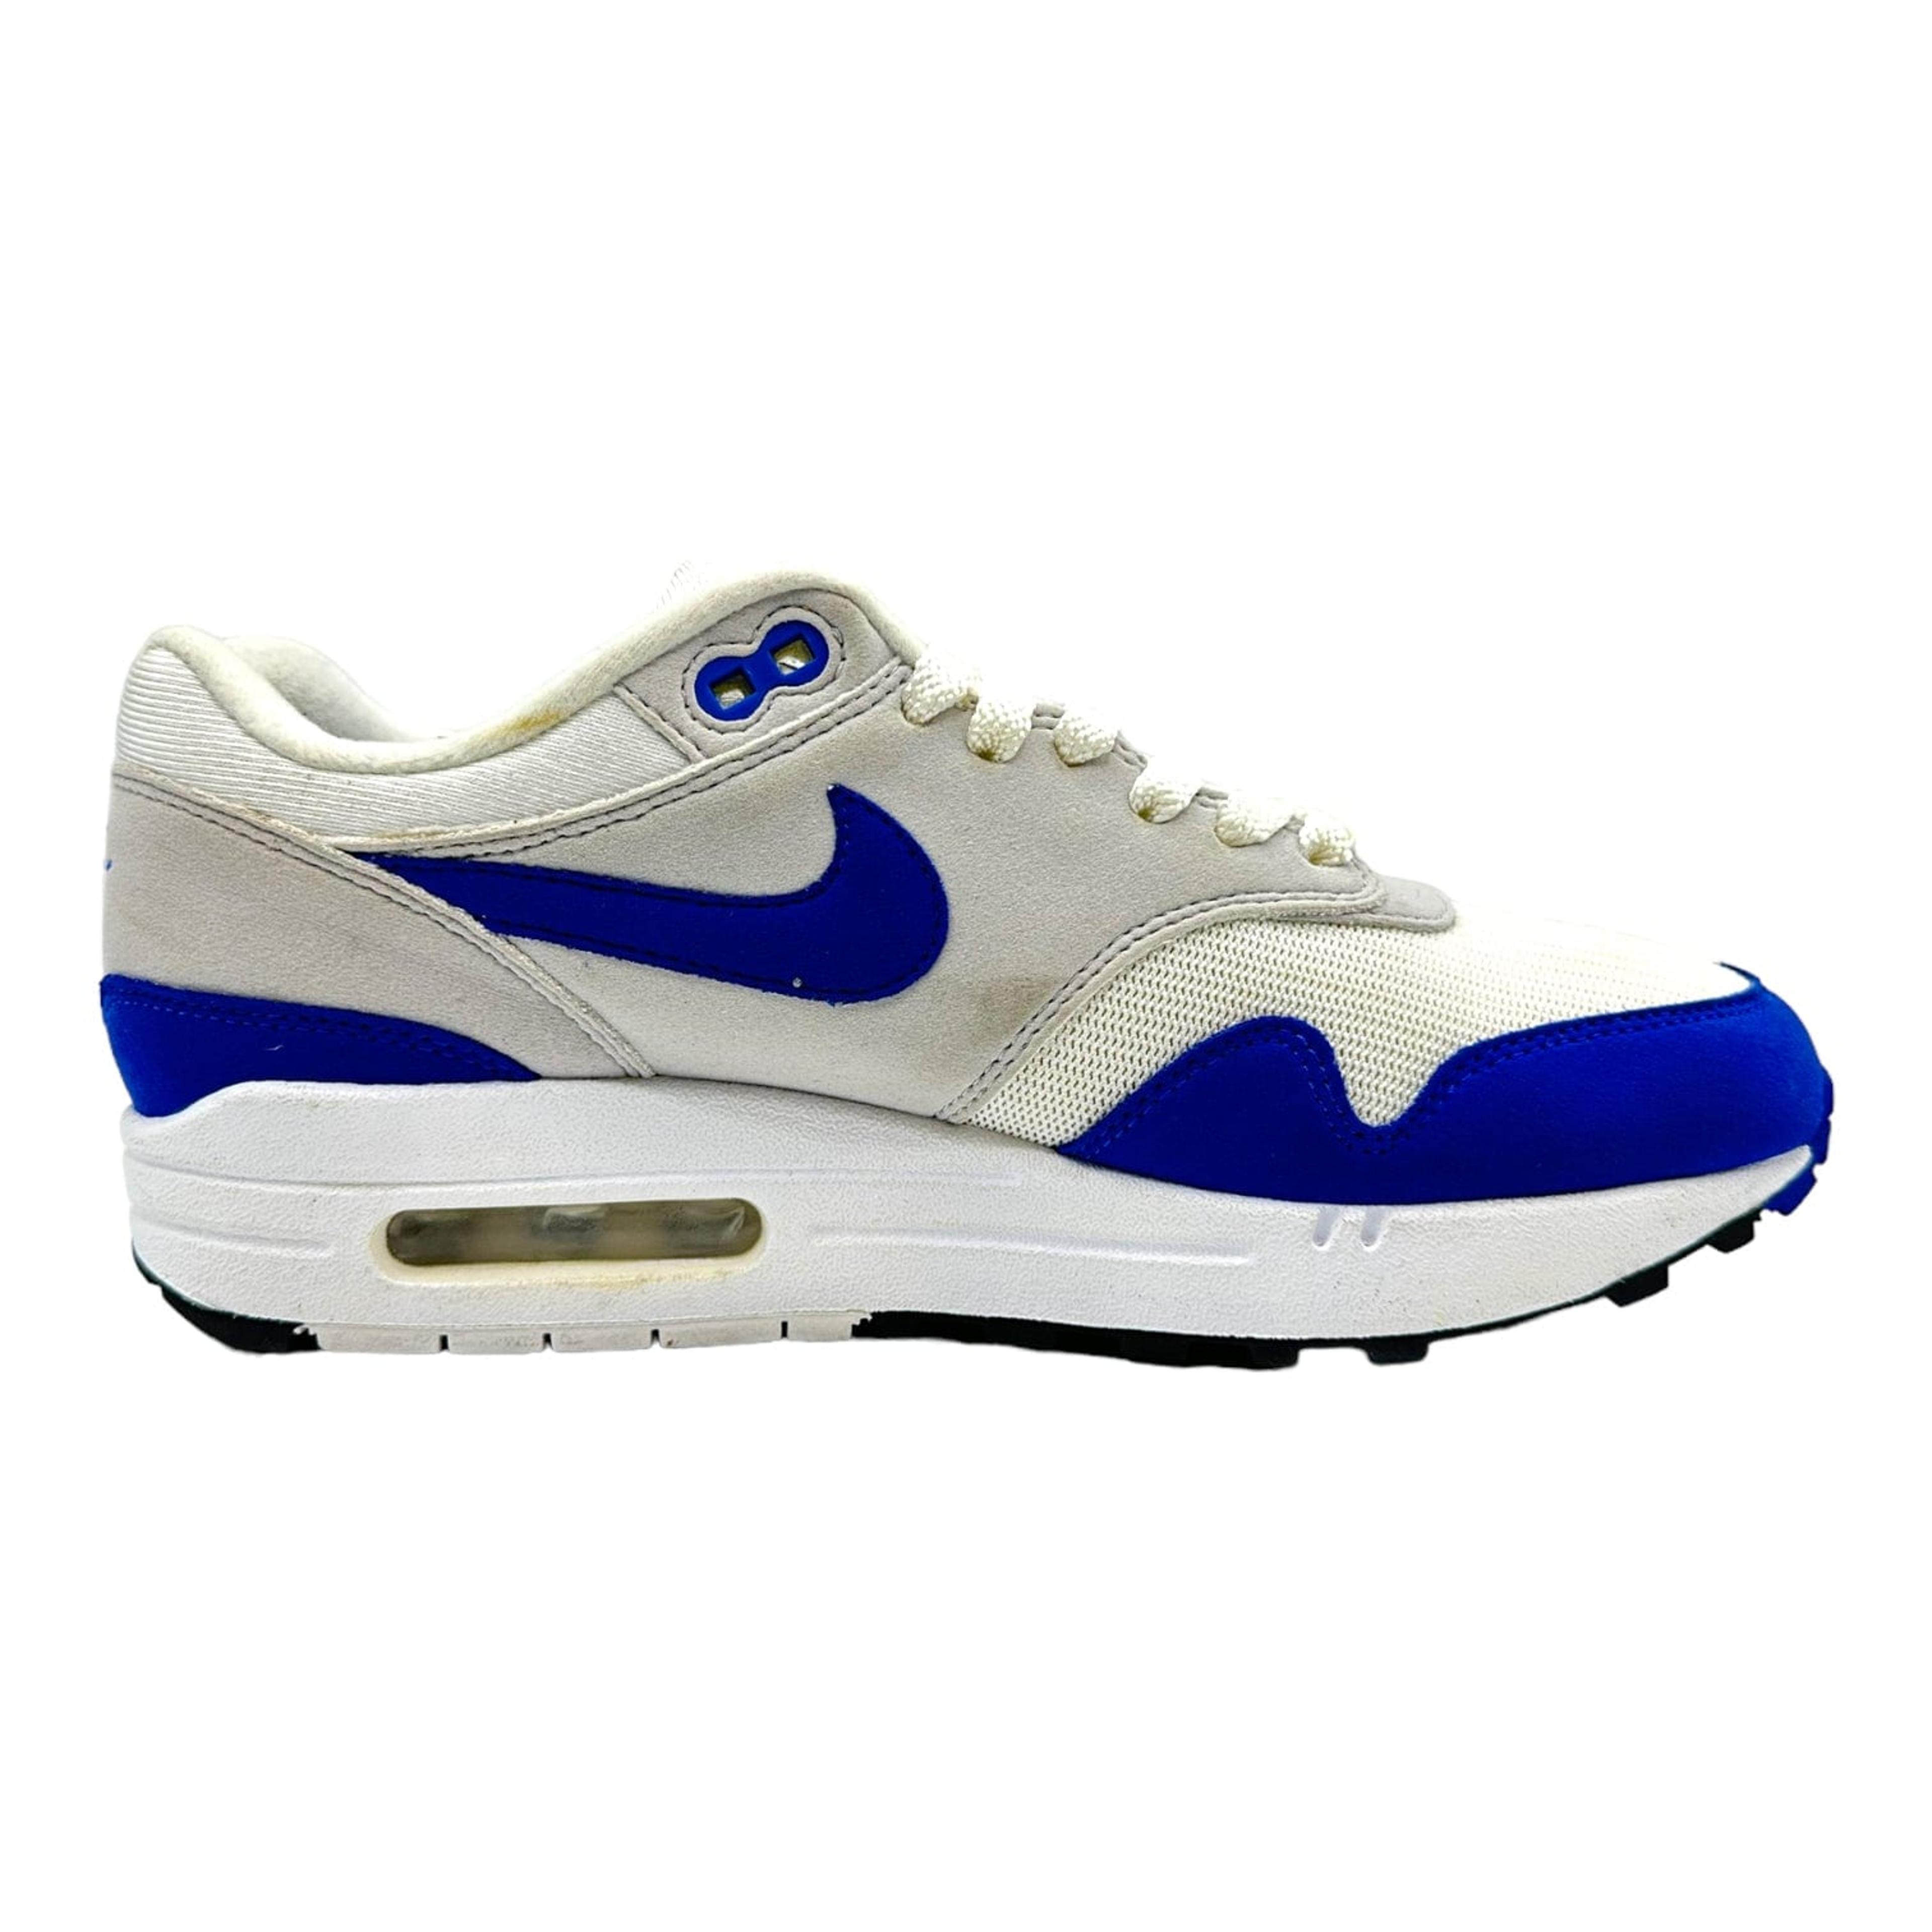 Alternate View 3 of Nike Air Max 1 Anniversary Royal (2017) Pre-Owned